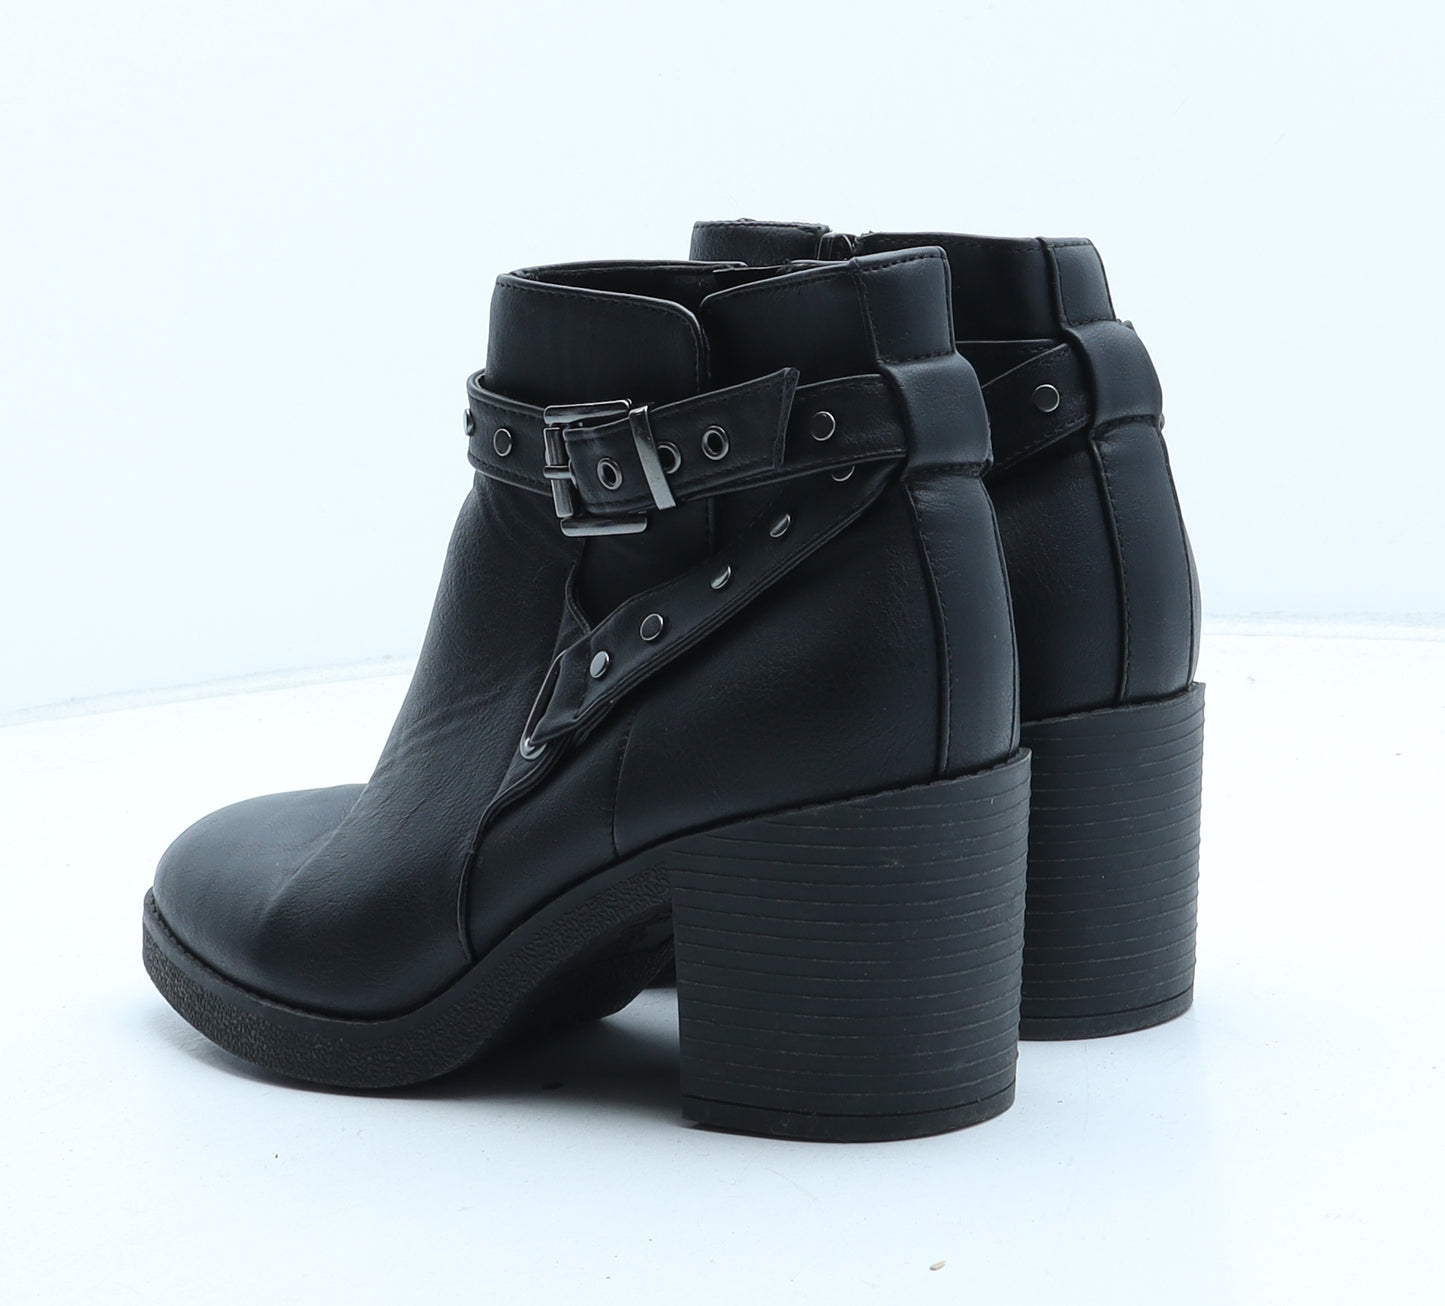 New Look Womens Black Synthetic Bootie Boot UK 4 - Estimated Size 4